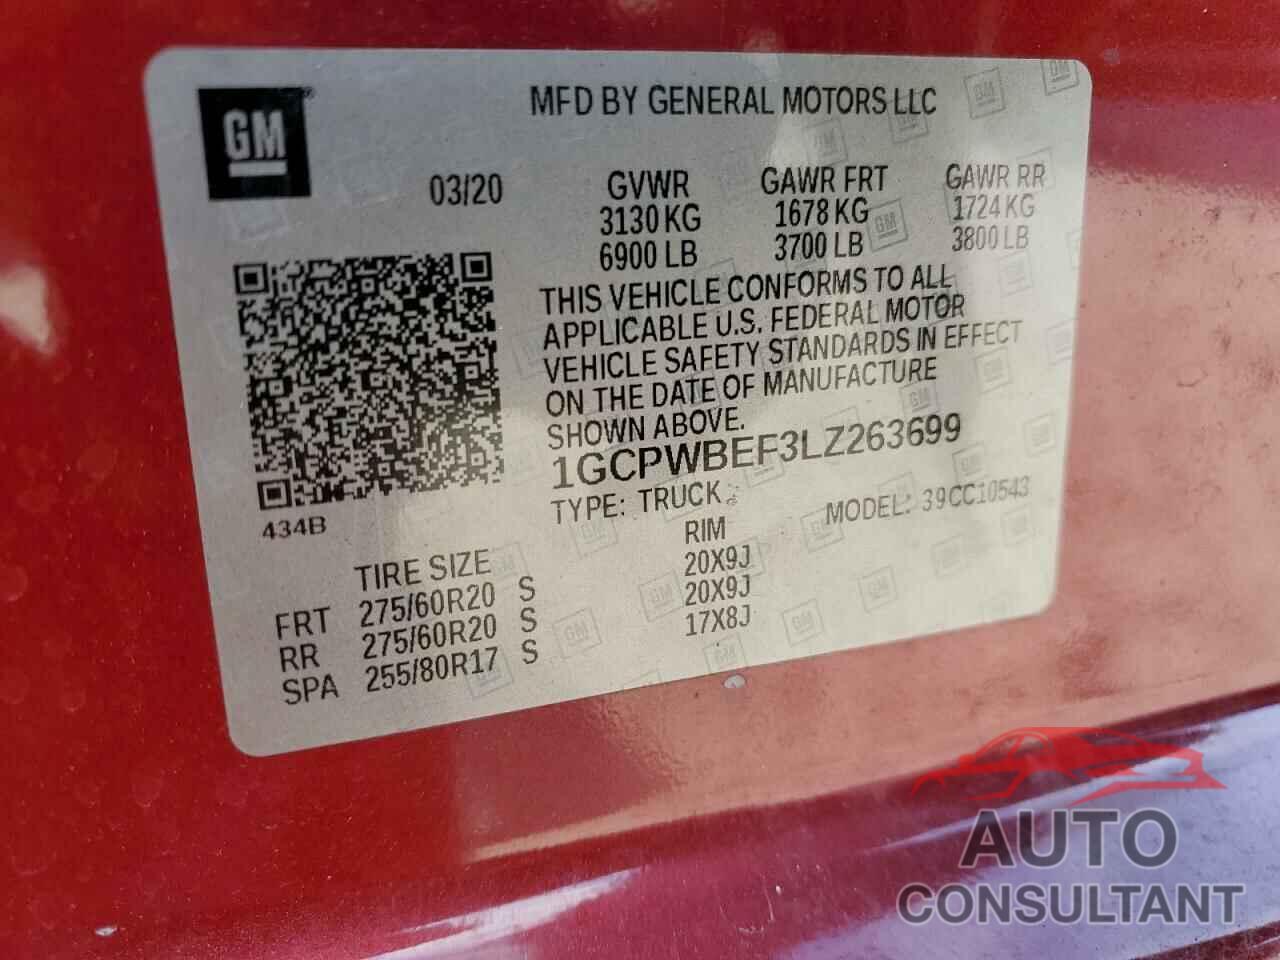 CHEVROLET ALL Models 2020 - 1GCPWBEF3LZ263699